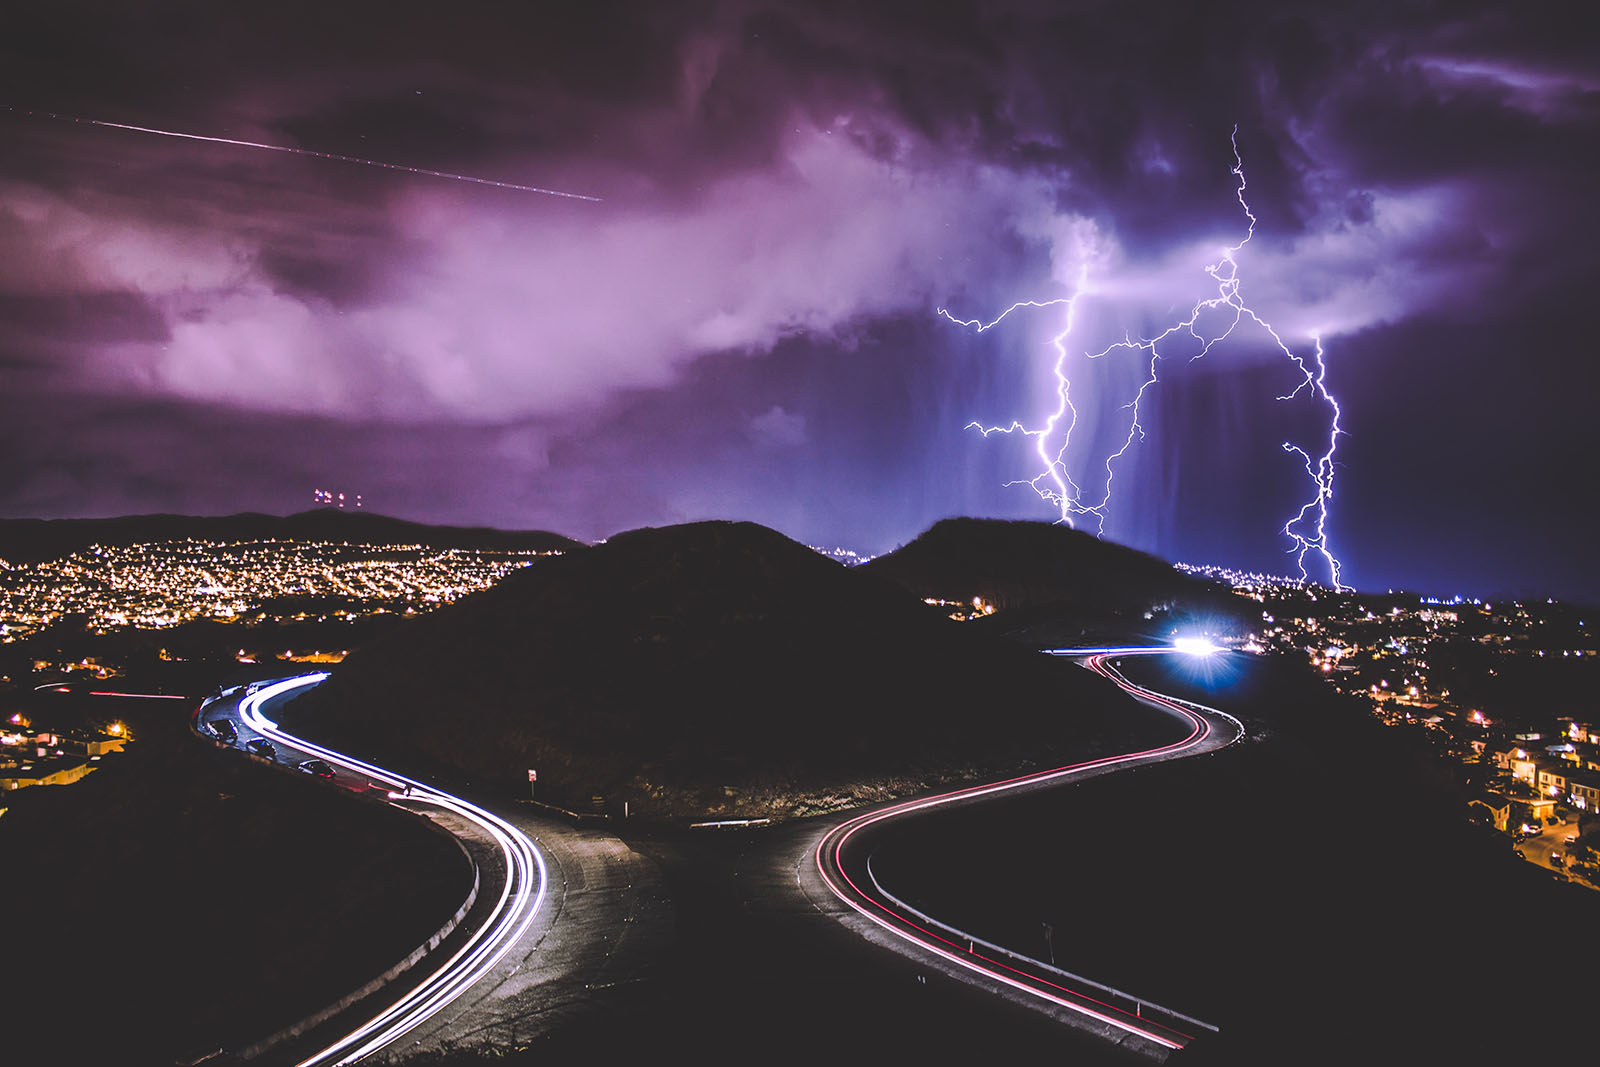 Lightning striking the earth in several places, storm clouds, cars speeding on a highway that curves around hills.